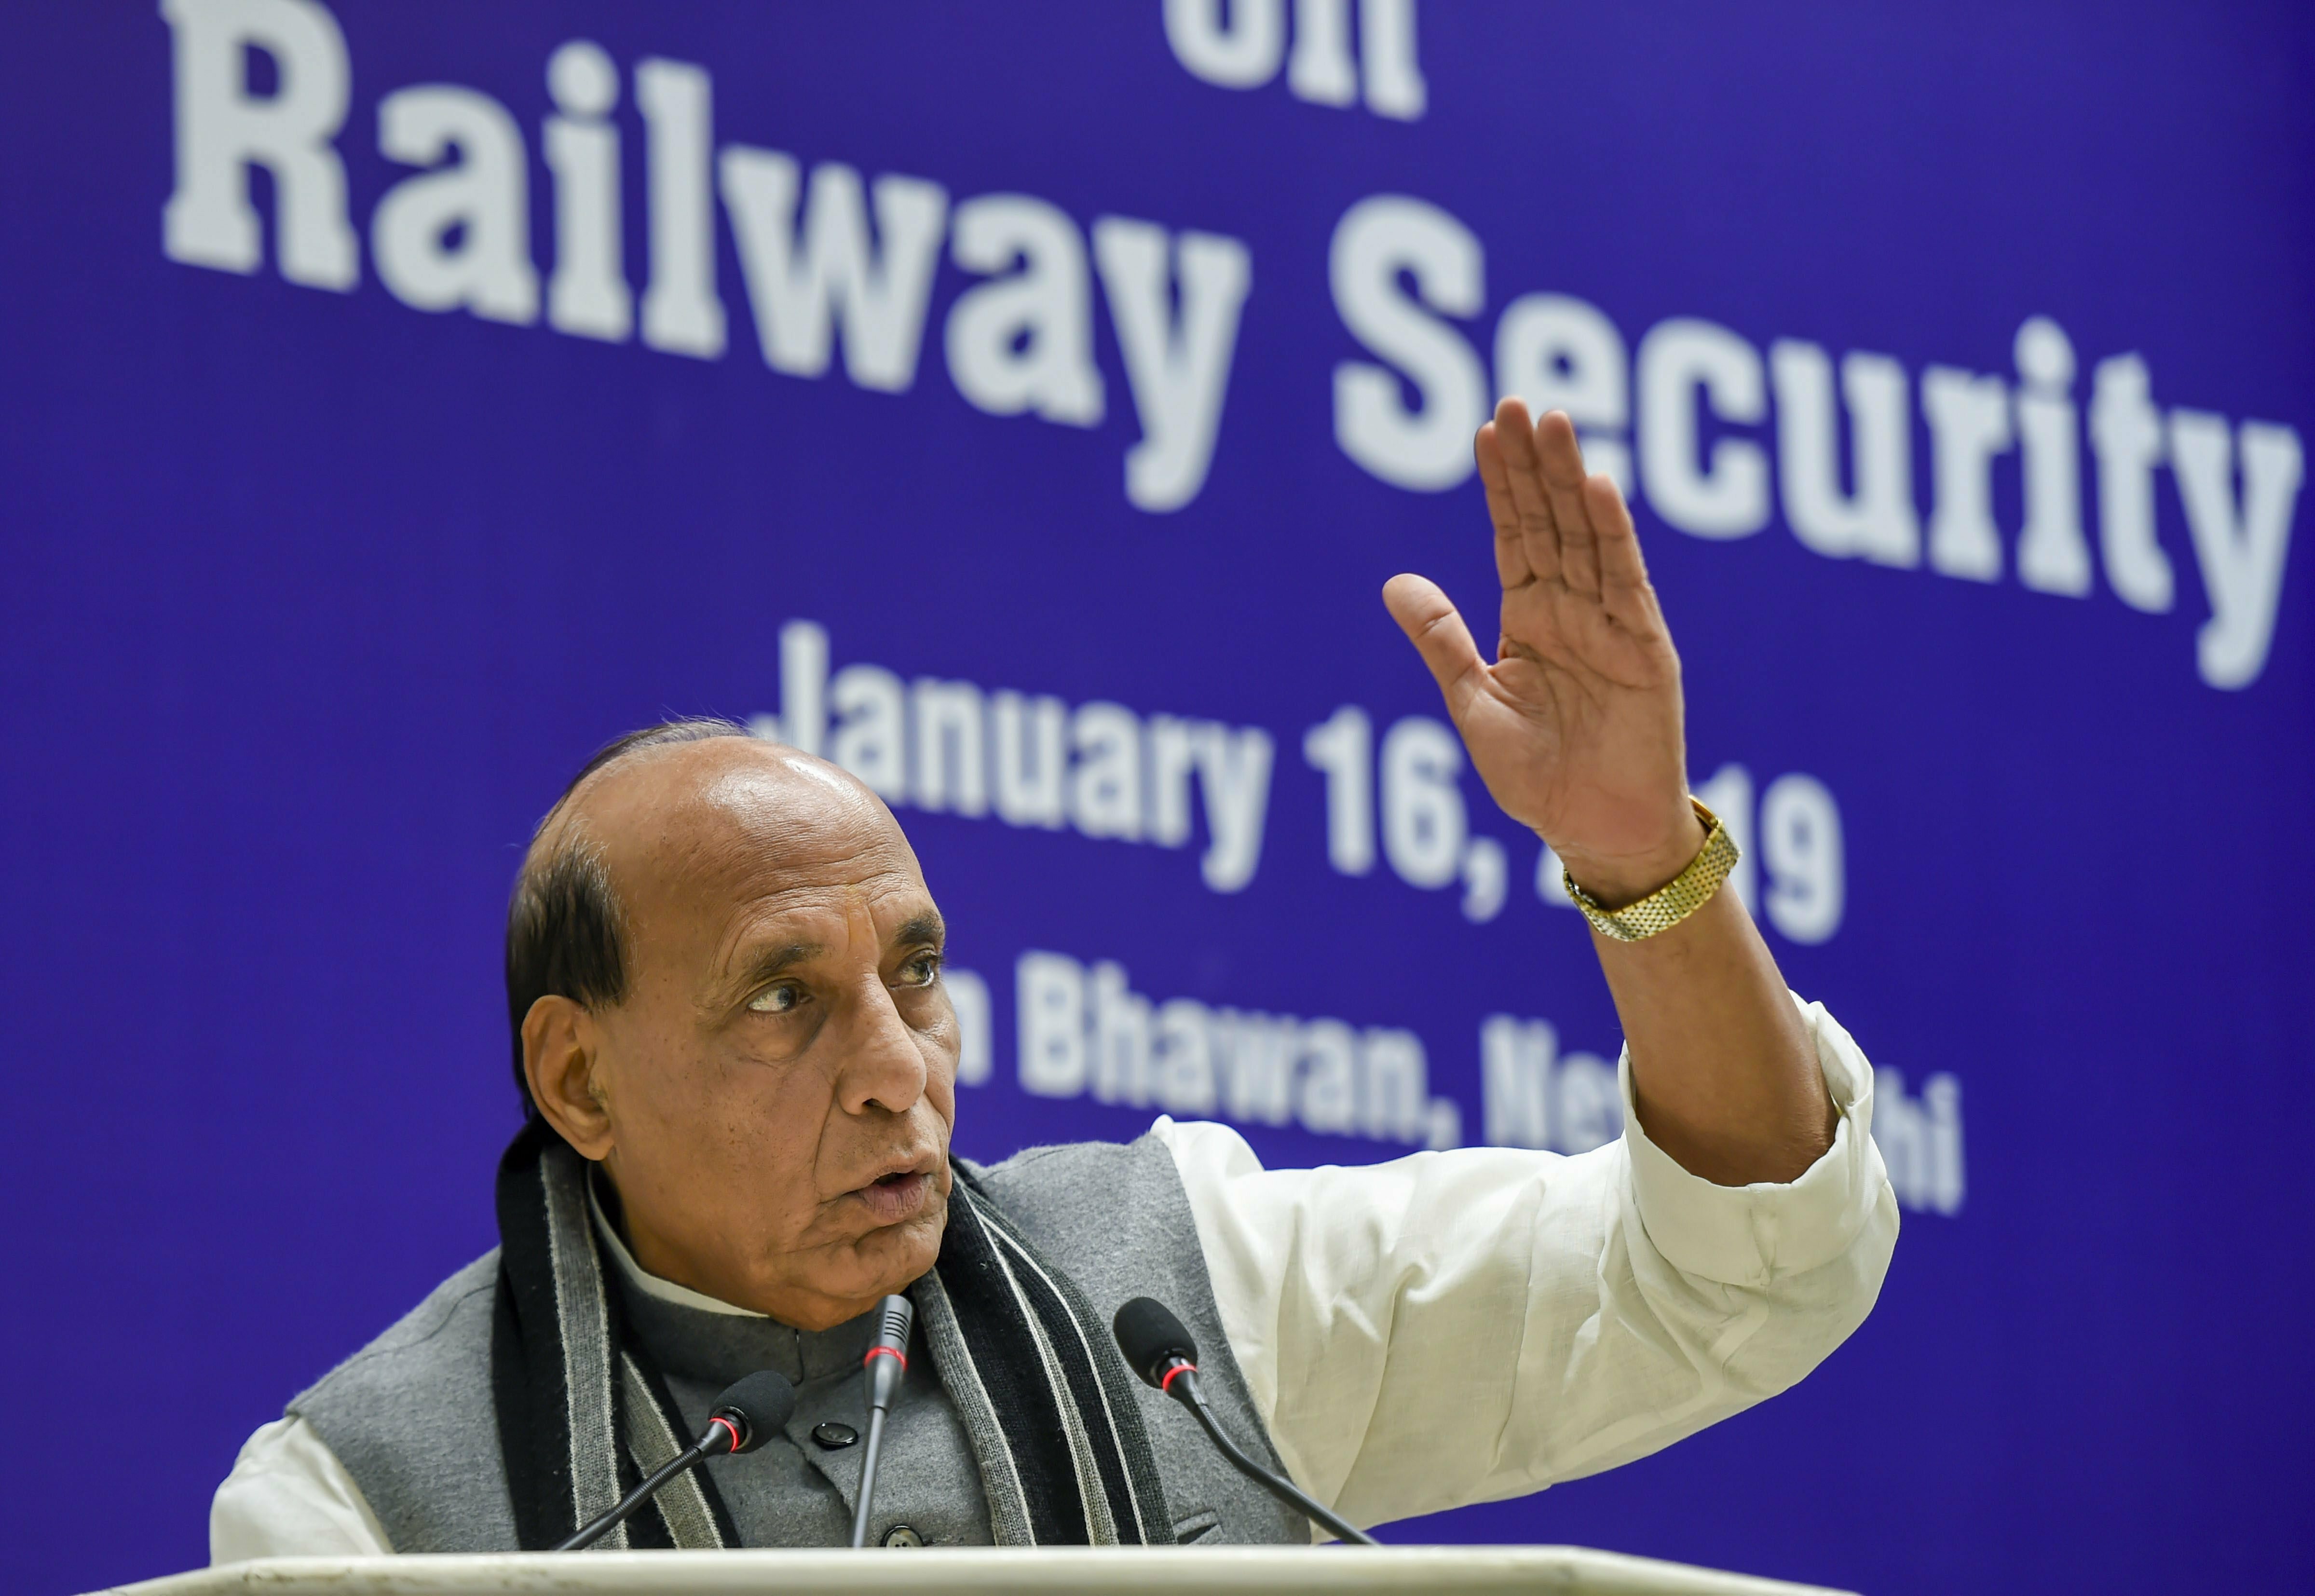 We expect Pakistan to reciprocate our gestures: Rajnath